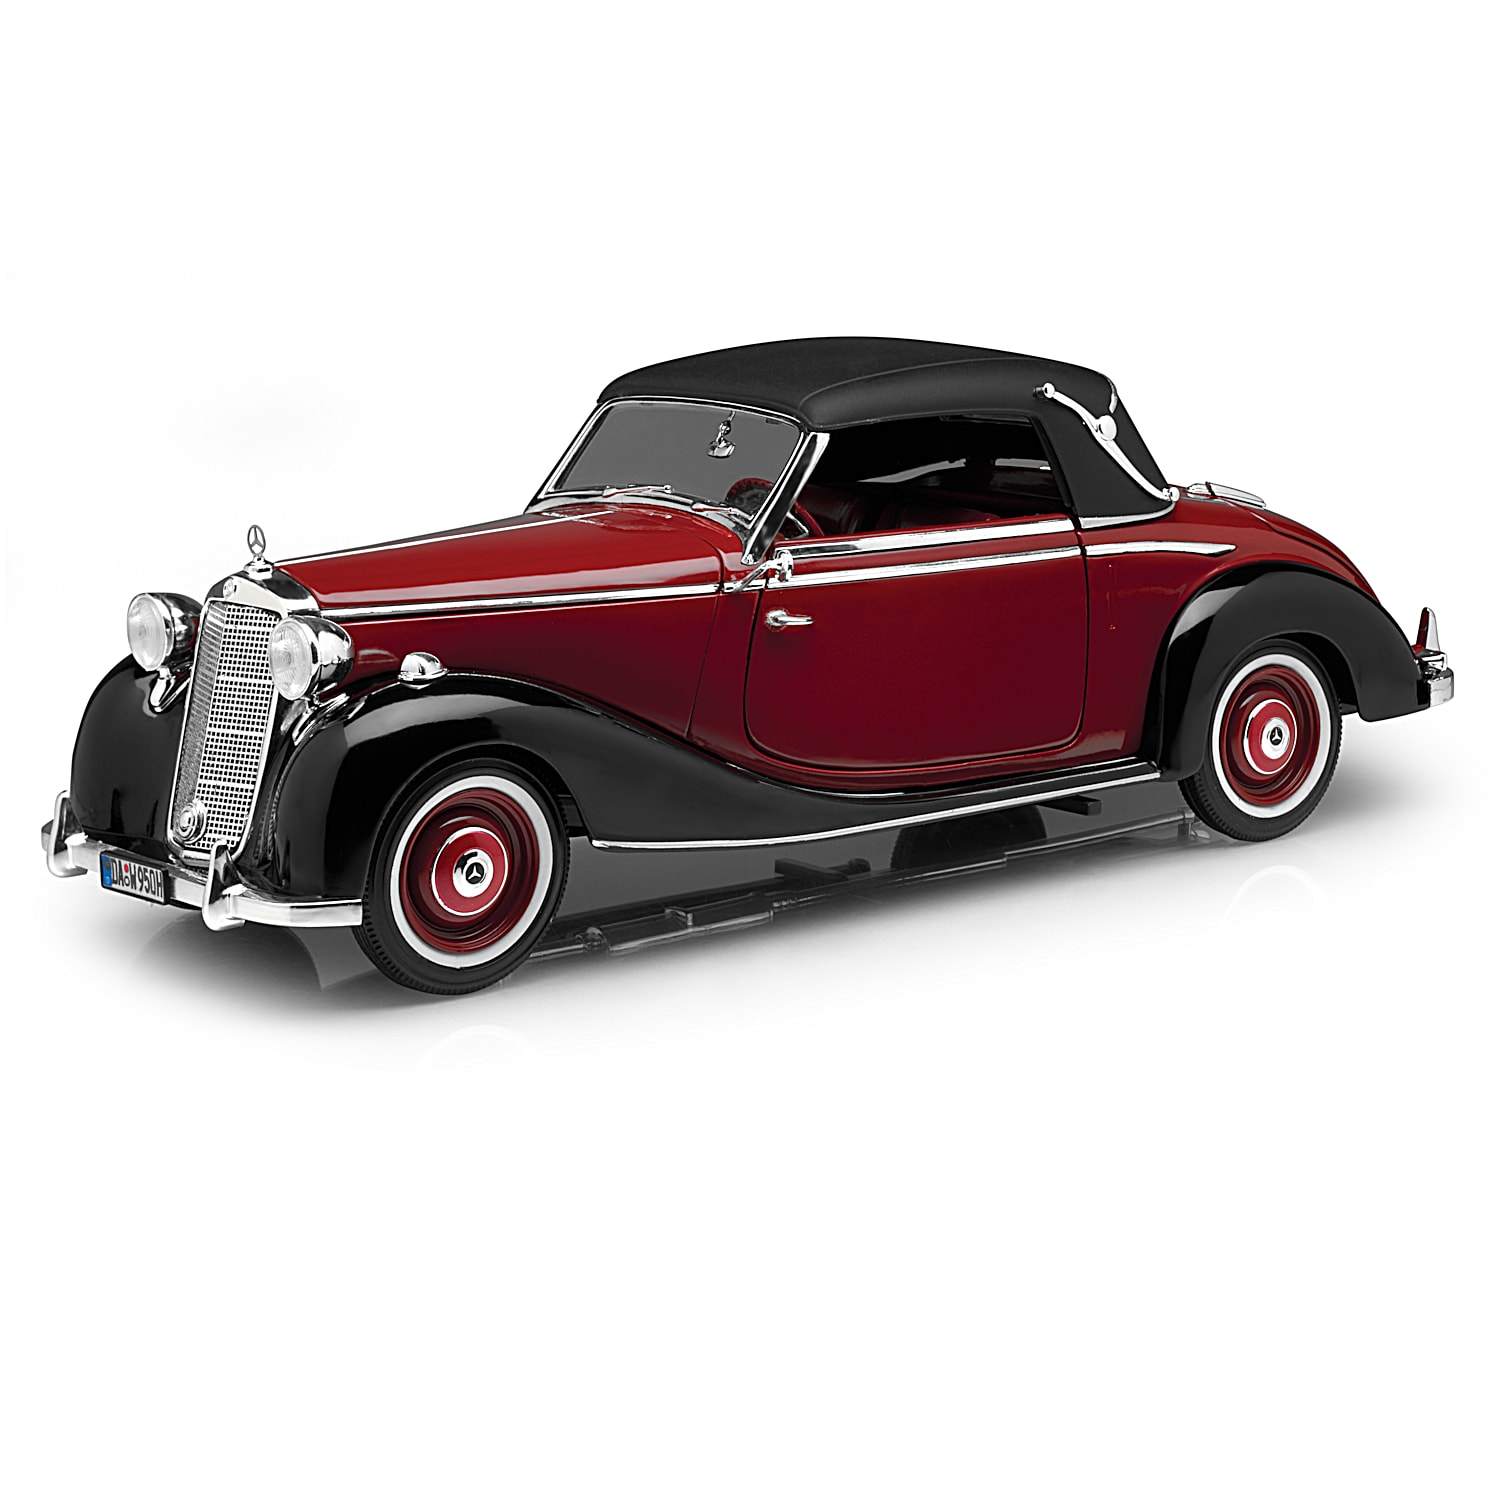 1:18-Scale 1950 Mercedes-Benz 170S Cabriolet Diecast Car Featuring A  Two-Tone Burgundy u0026 Black Paint Finish With Rubber Whitewall Tires